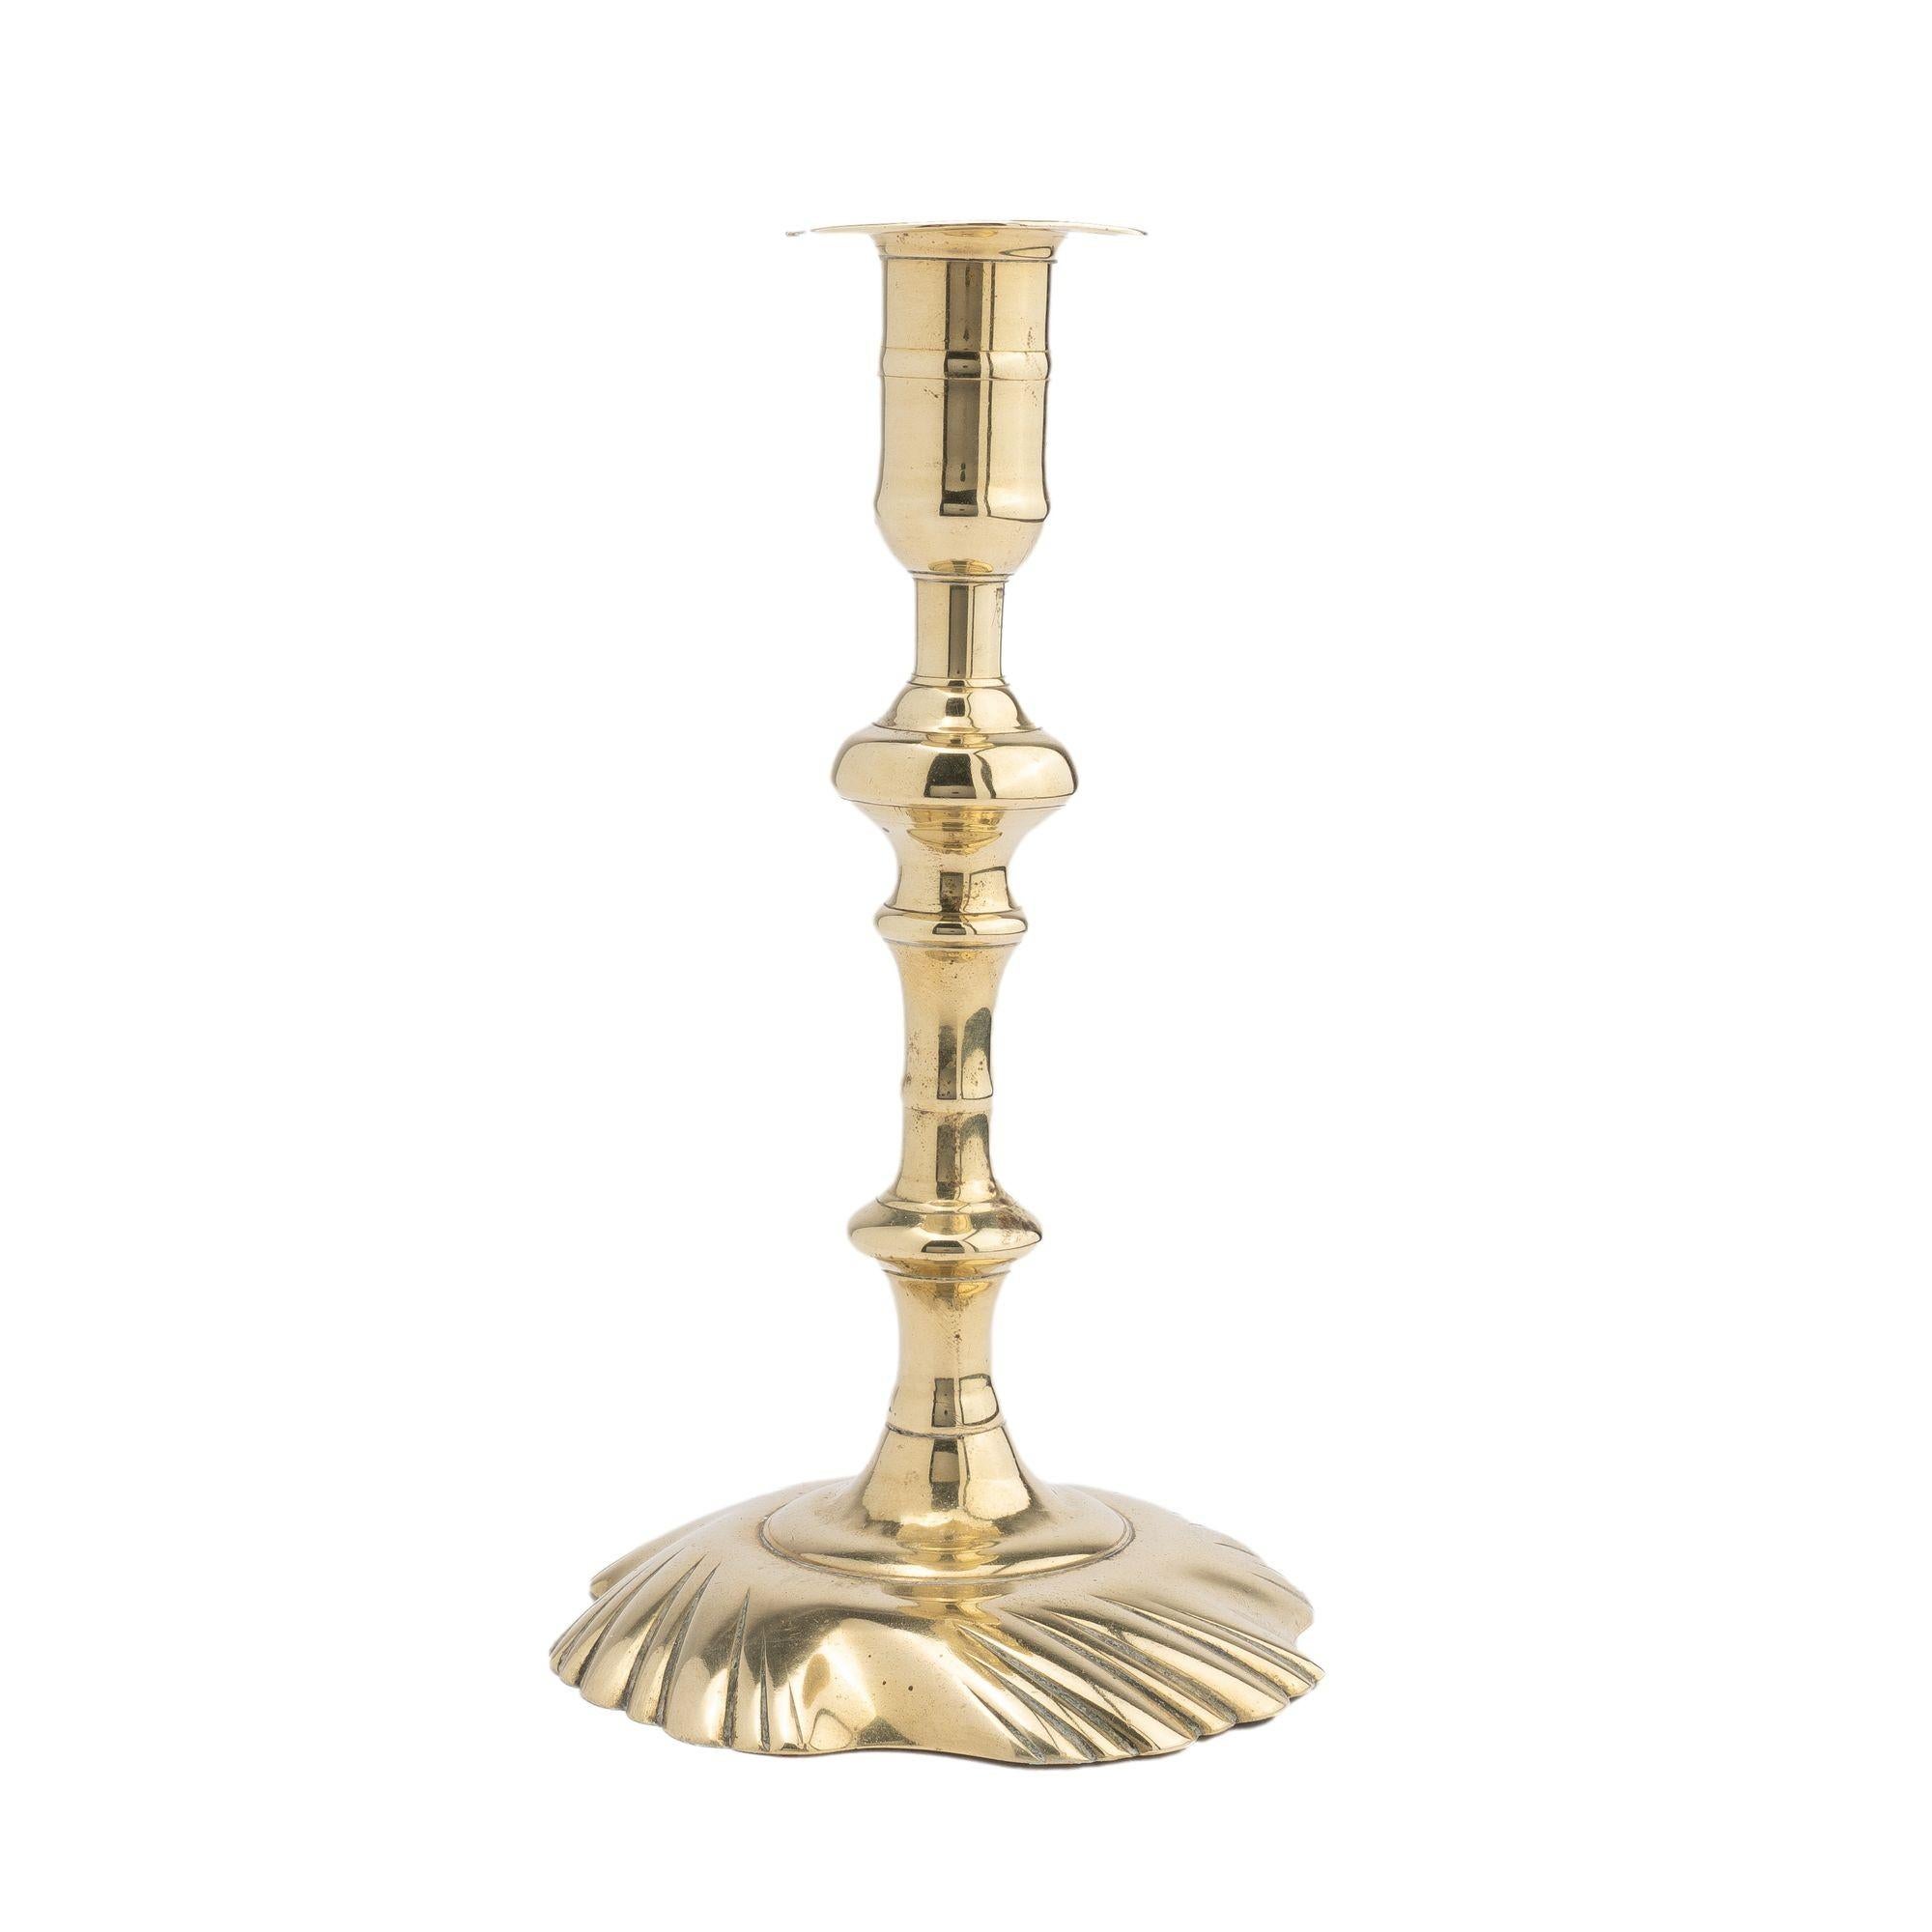 Hollow core cast brass candlestick with swirl base peened to a knobbed candle shat supporting a candle cup with bobeche.

Birmingham, England, 1750-75.